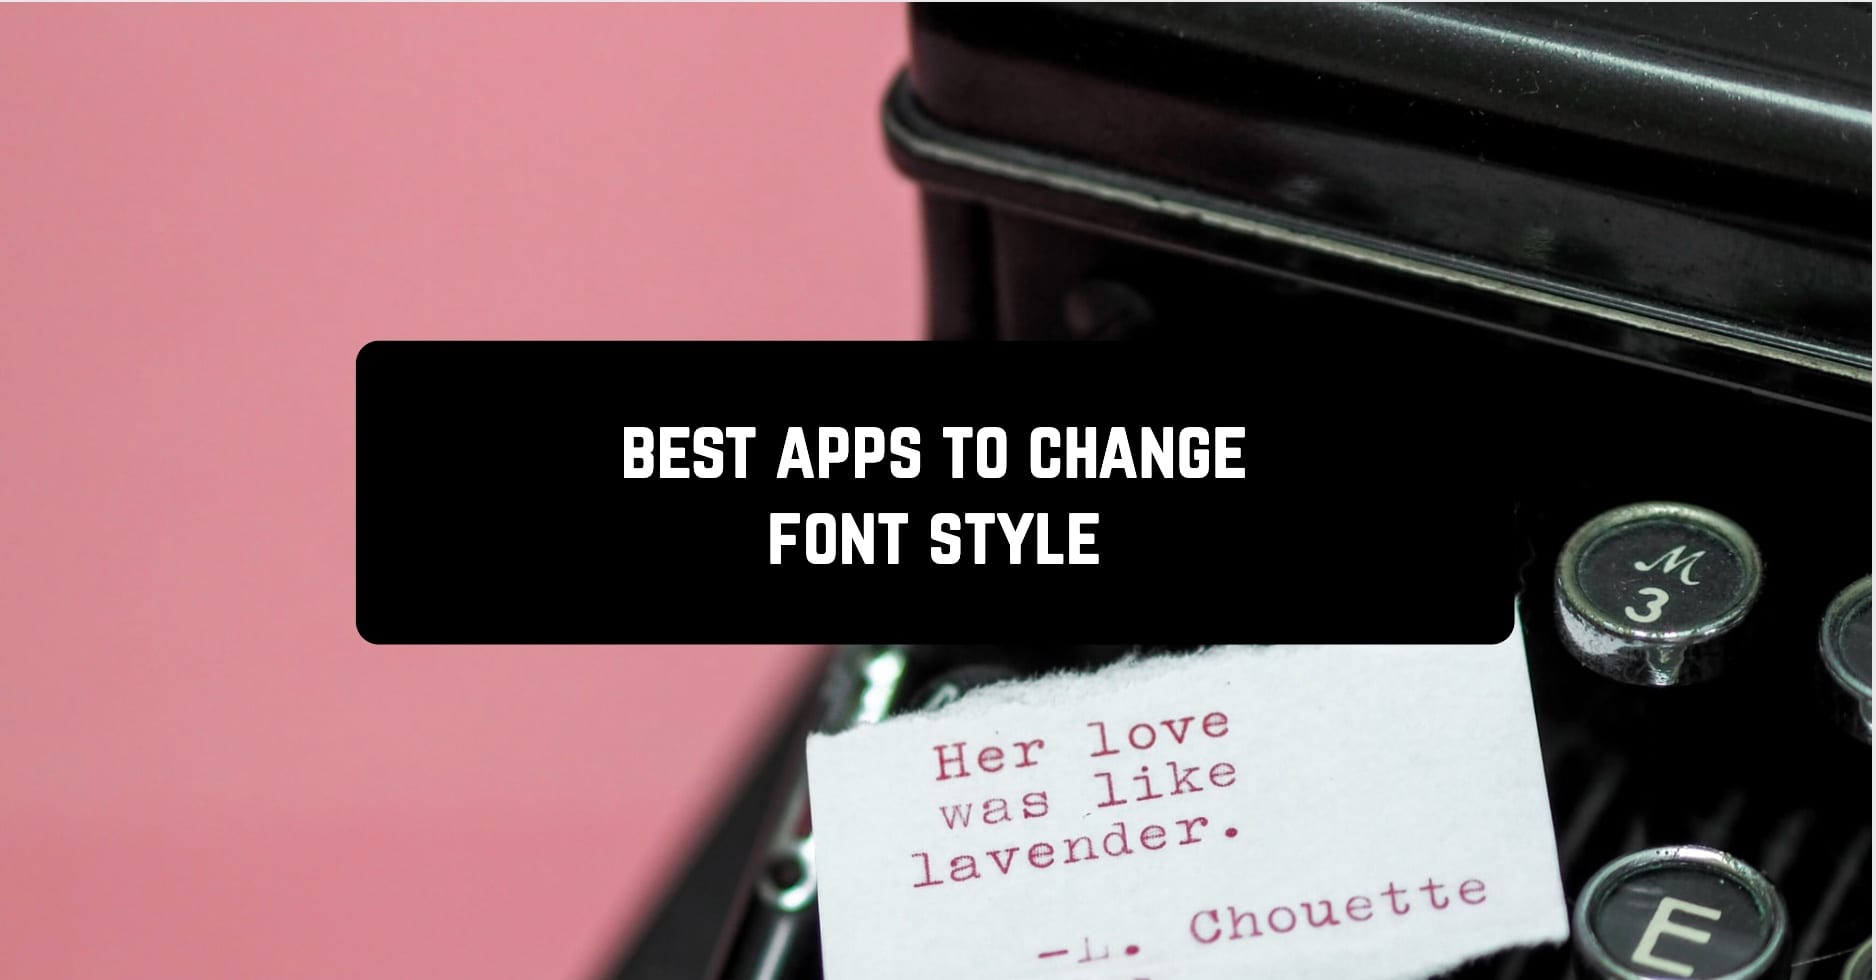 Best apps to change font style